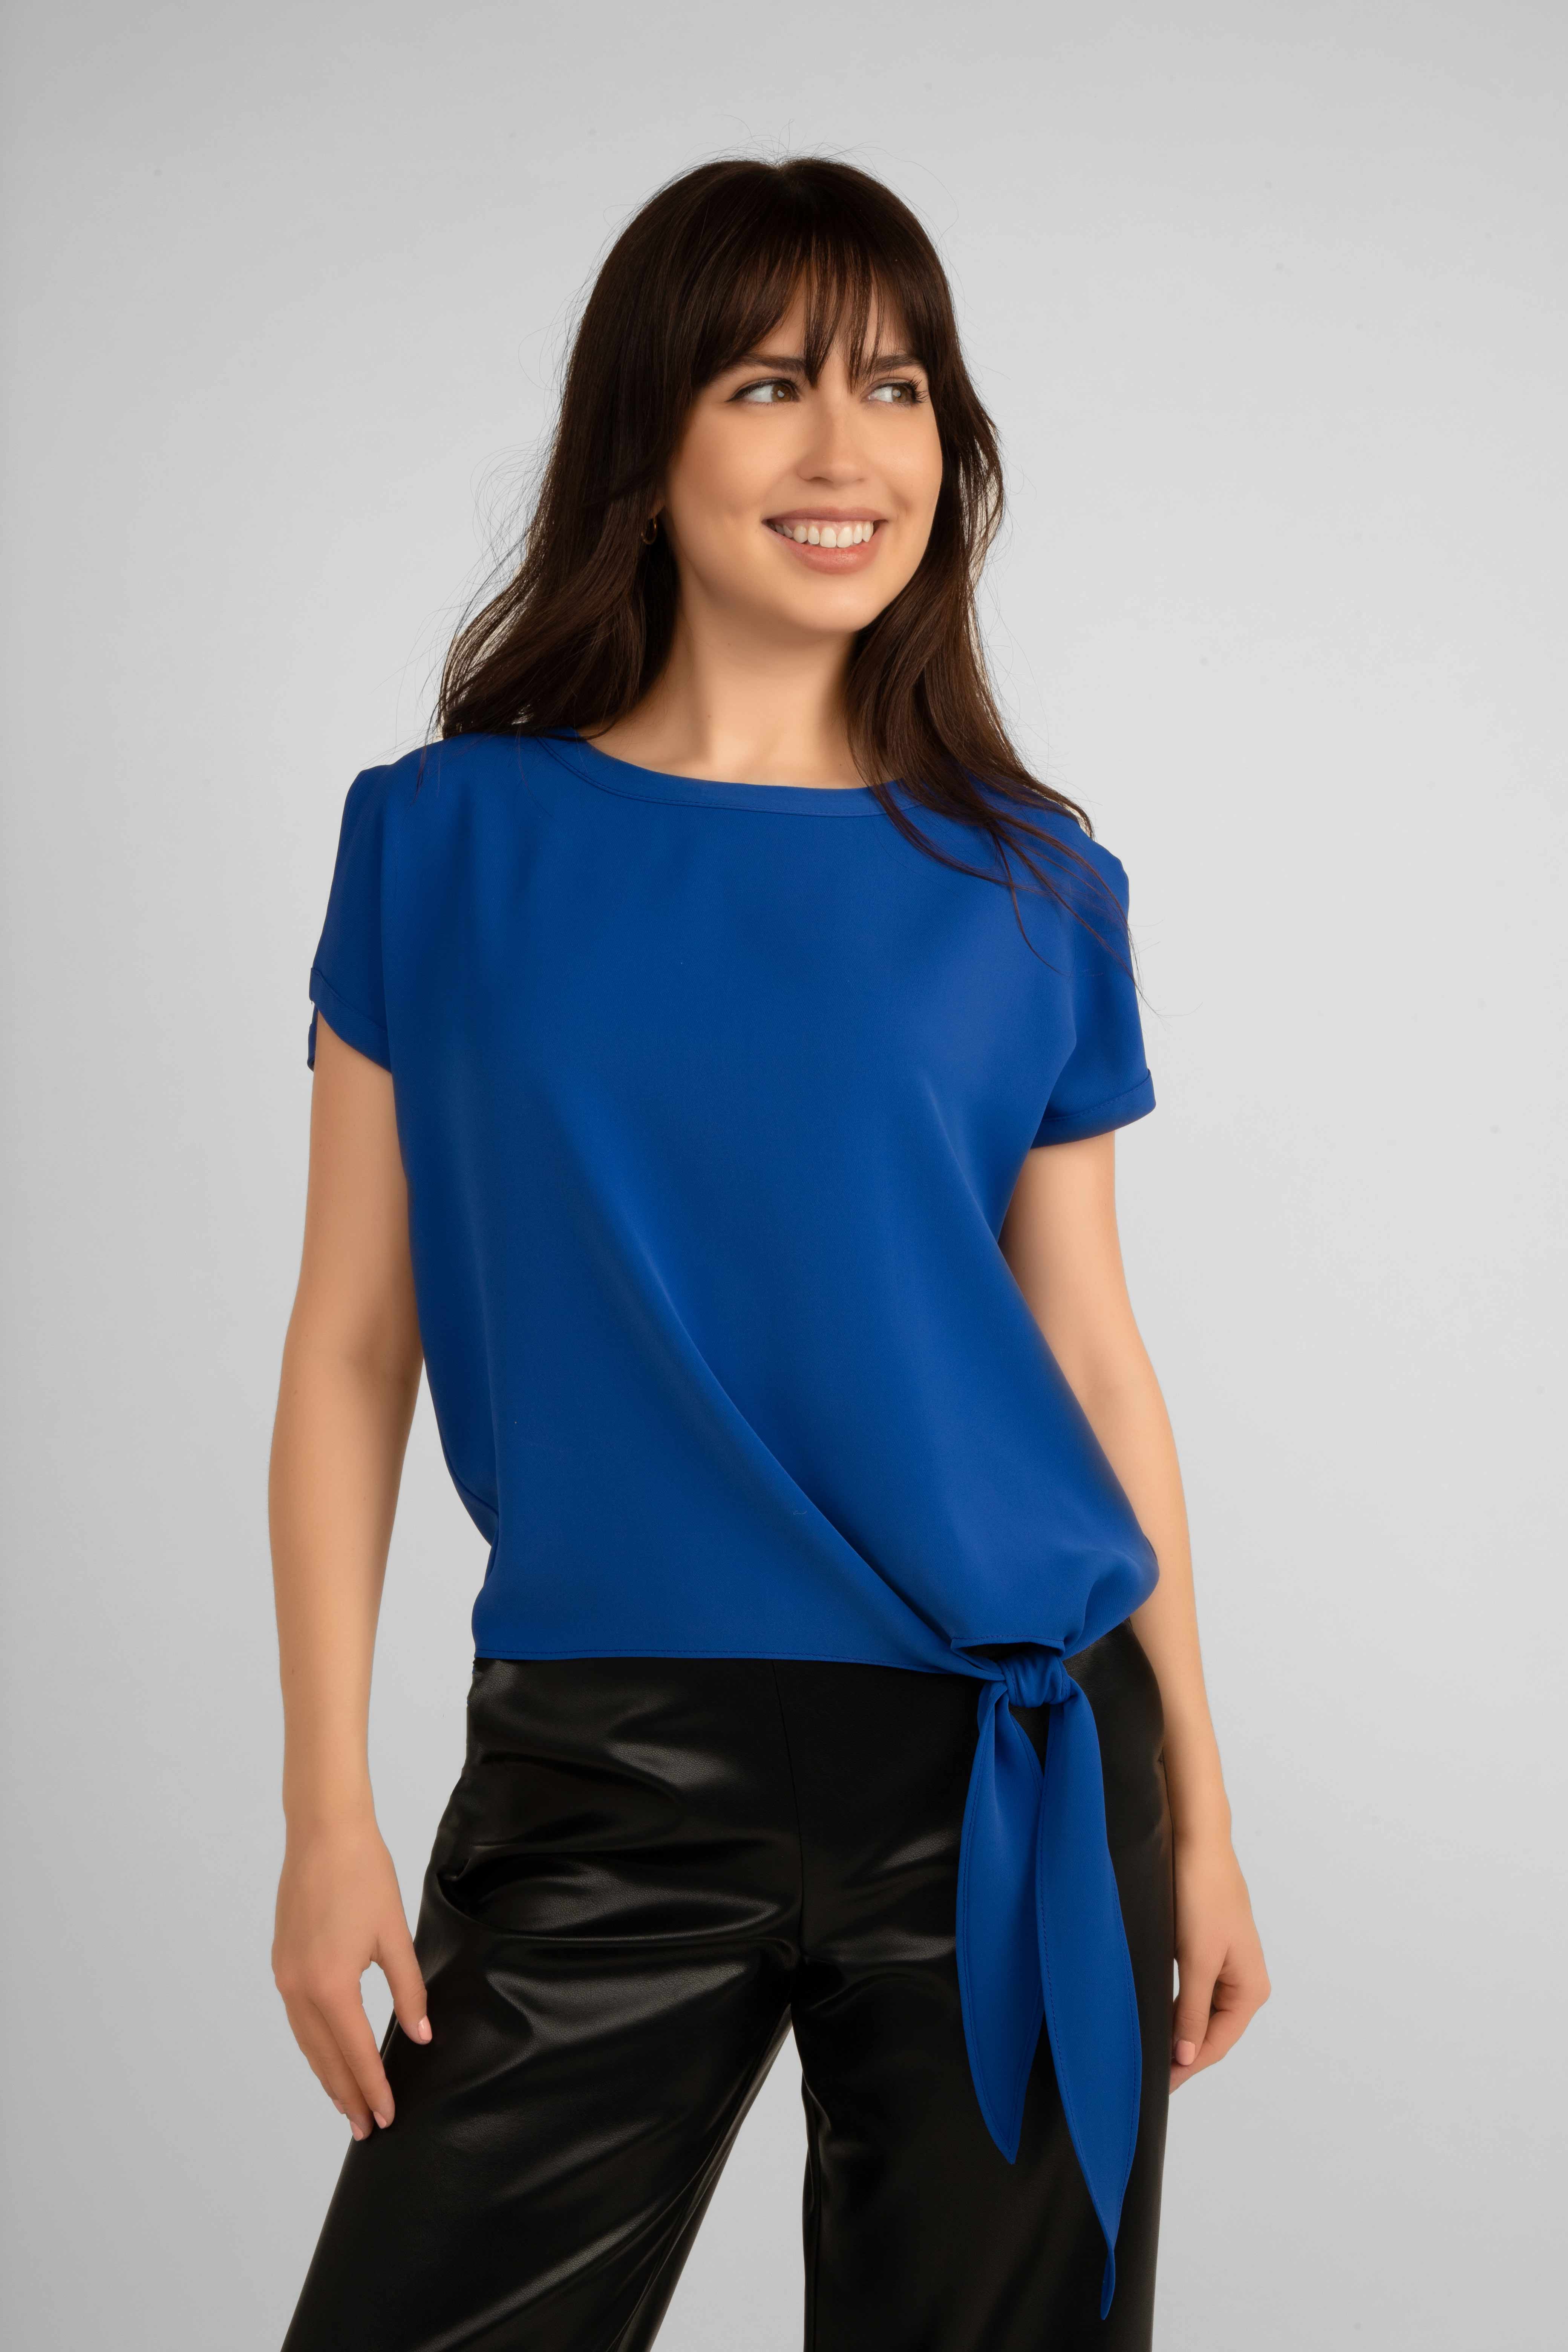 Women's Clothing FRANK LYMAN (181224) Short Sleeve Top with Side Tie in ROYAL